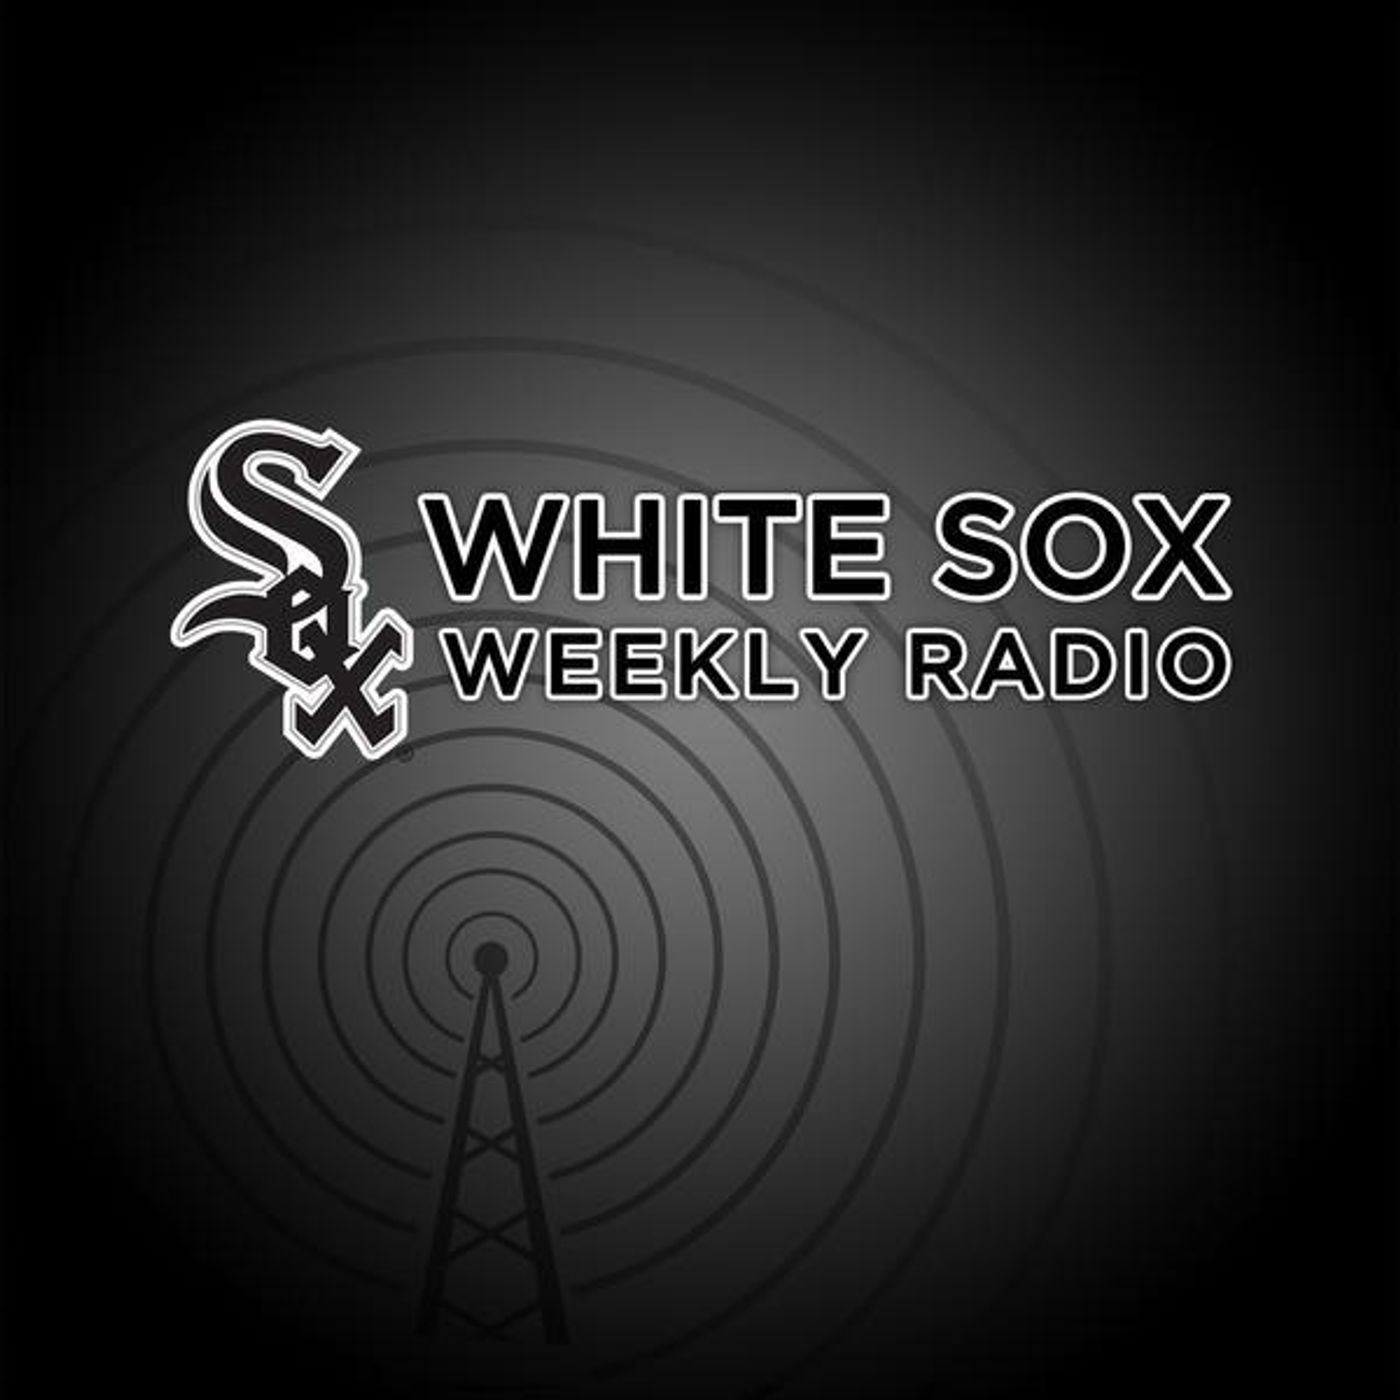 6-4-16 - White Sox Director of Scouting, Nick Hostetler